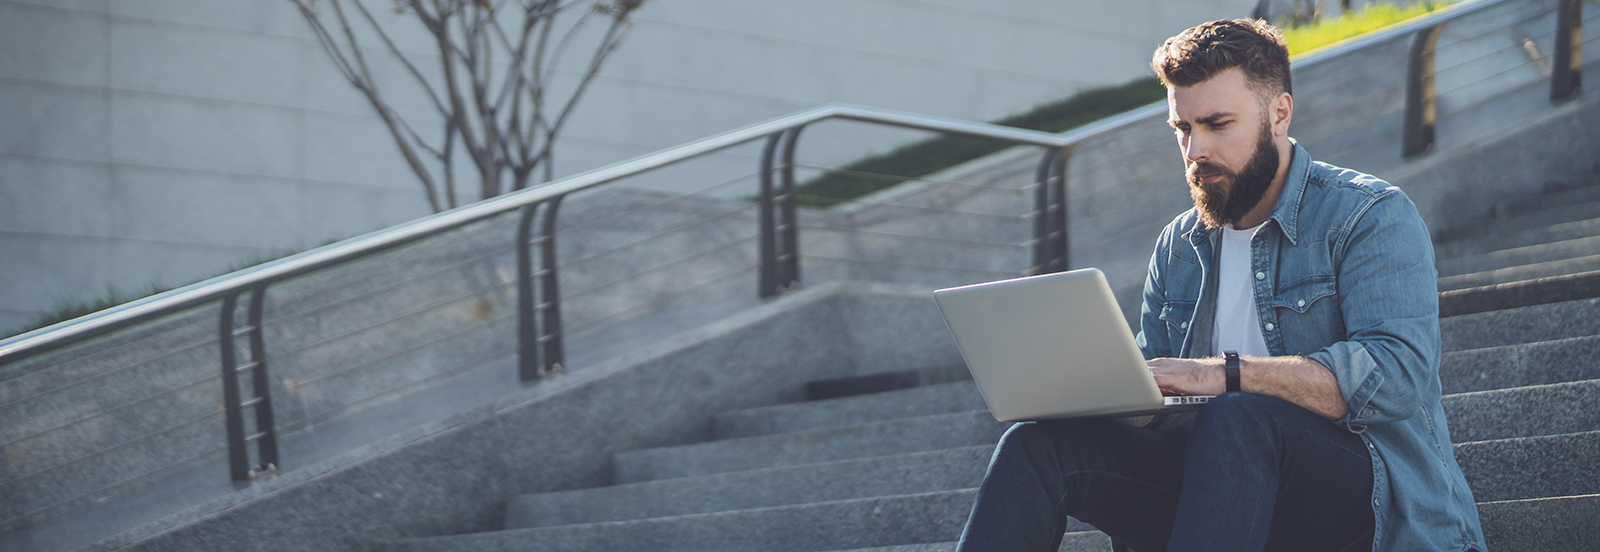 male student sitting on outdoor steps working on laptop